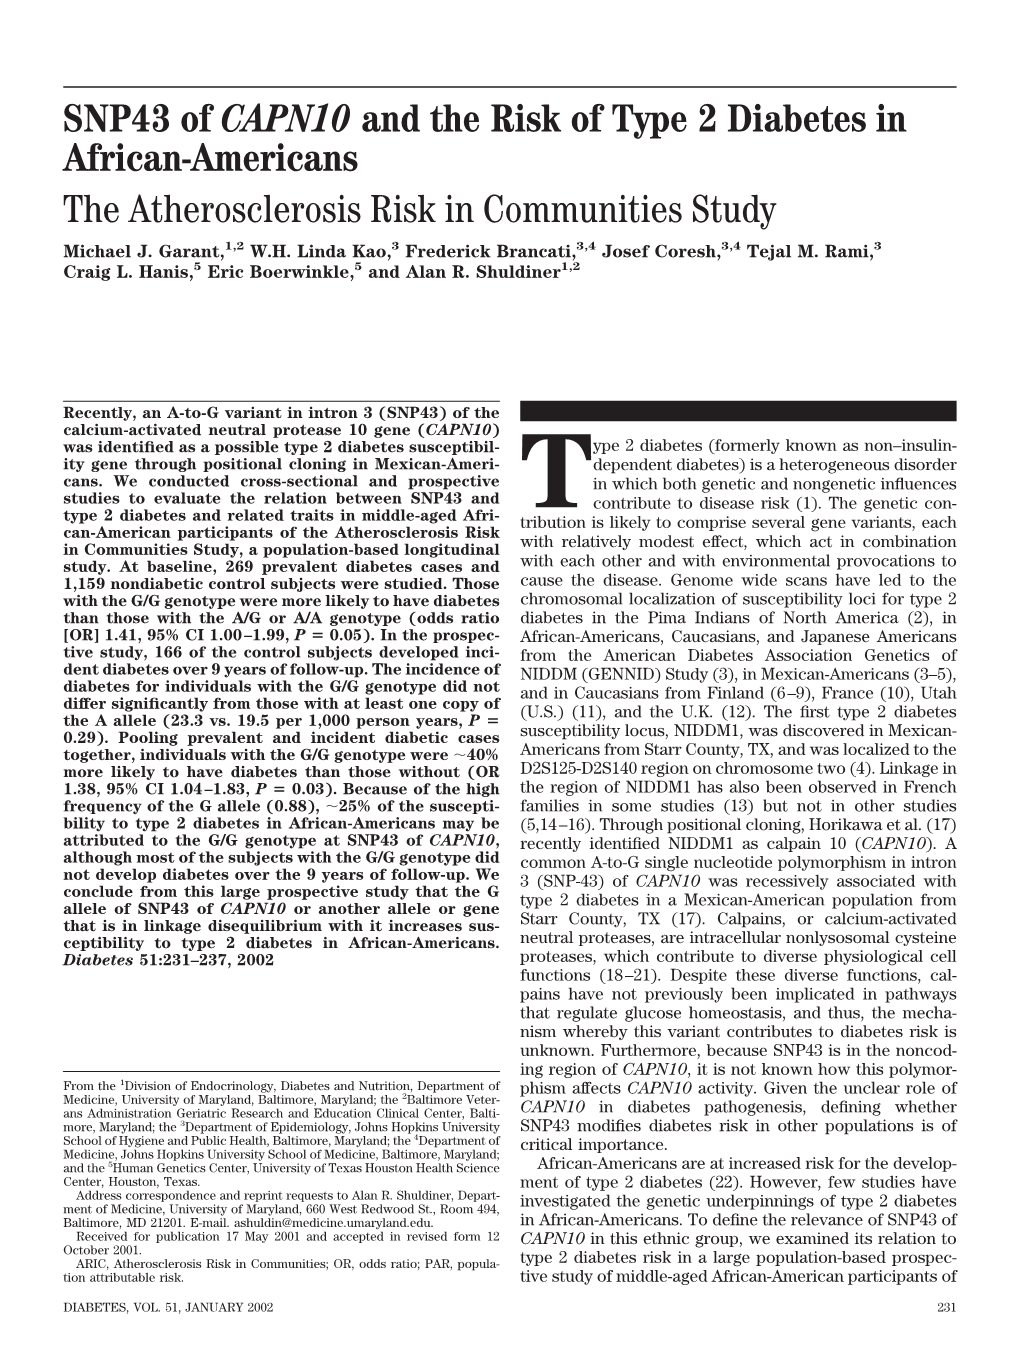 SNP43 of CAPN10 and the Risk of Type 2 Diabetes in African-Americans the Atherosclerosis Risk in Communities Study Michael J